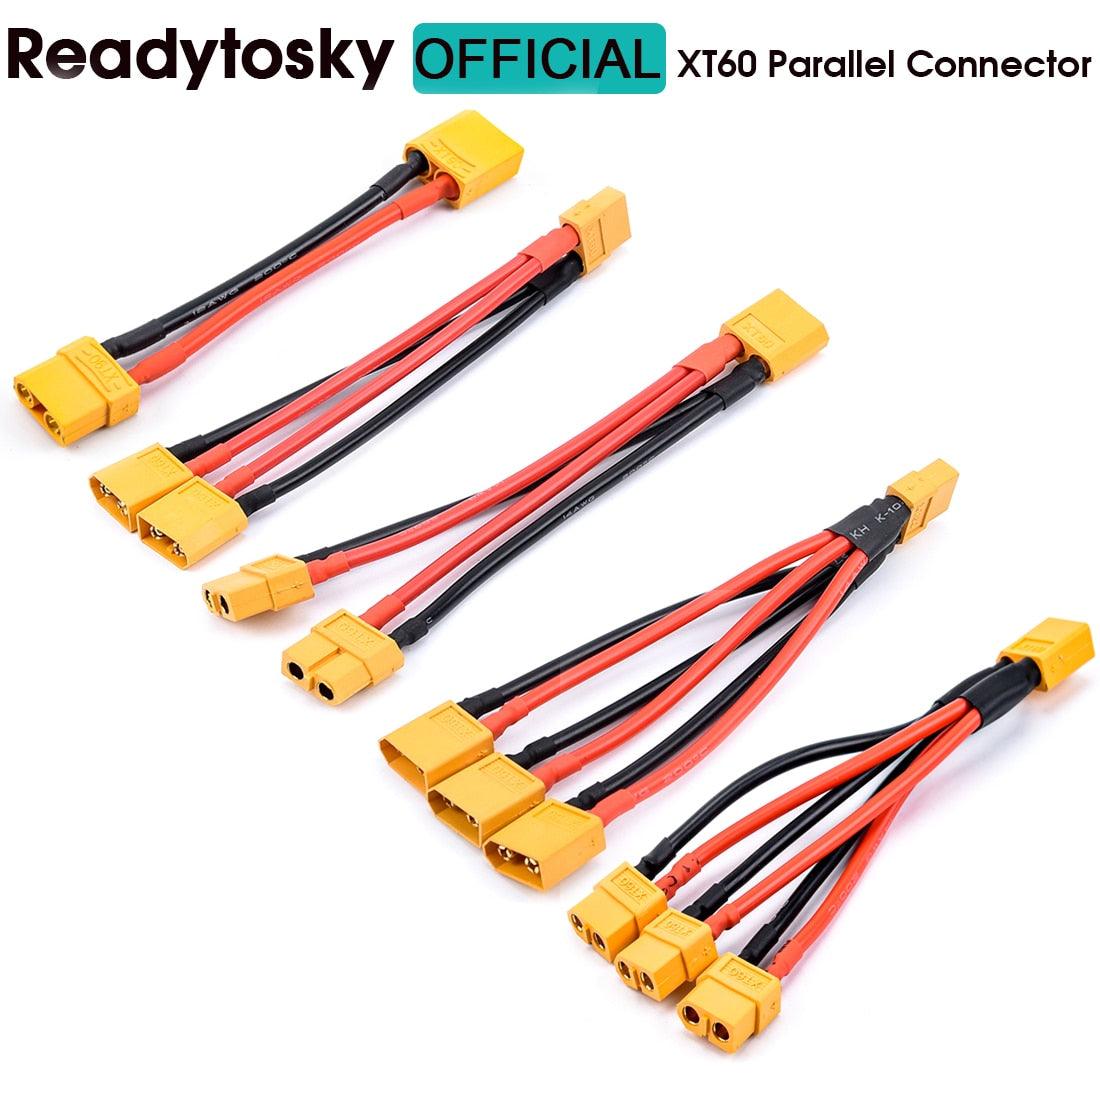 Y Harness with XT60 Leads-Z-E0142